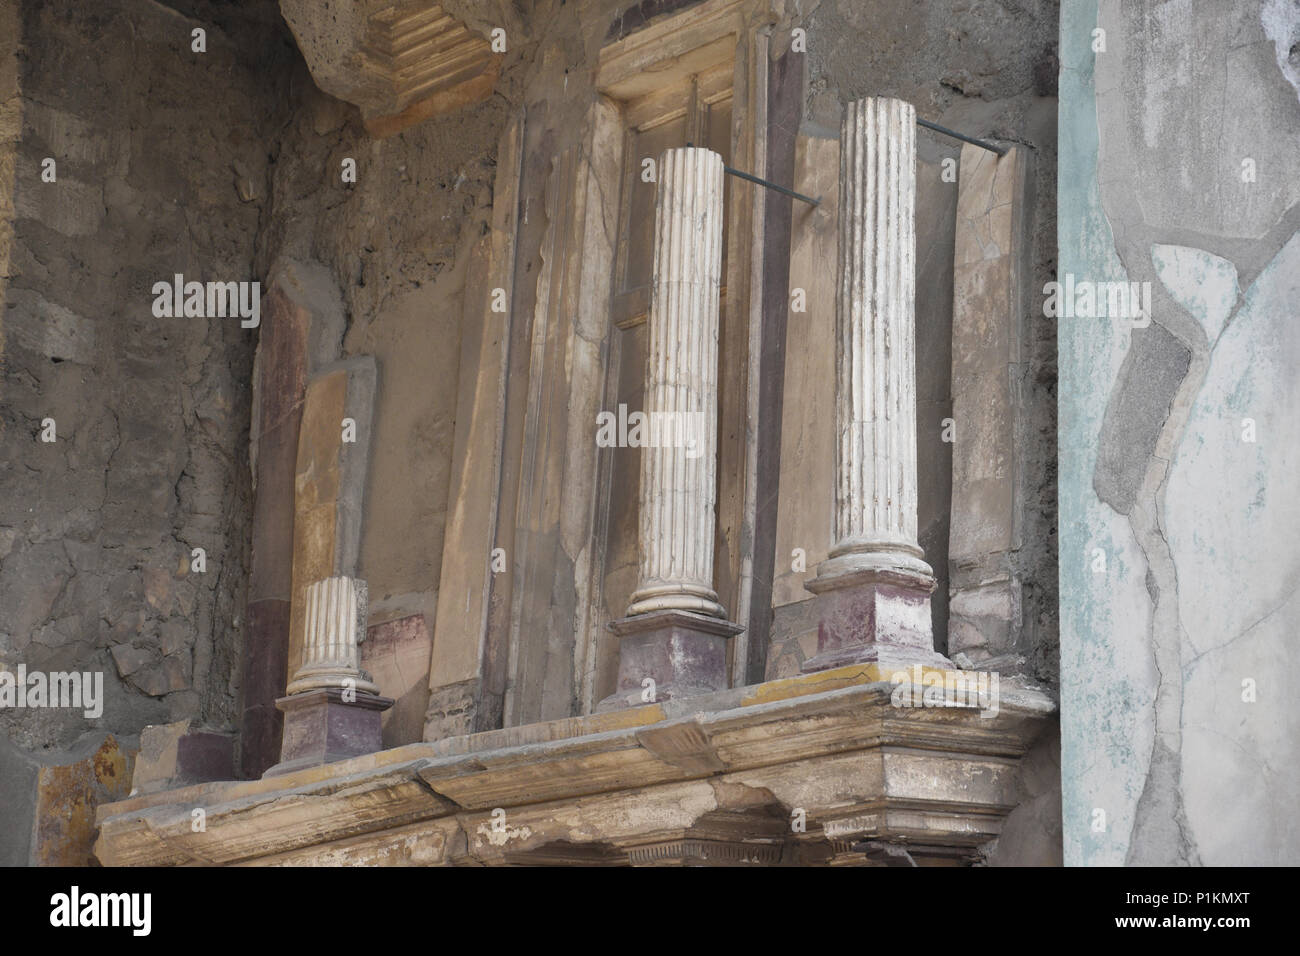 Columns decorating the entrance to the House of the Faun in the Ancient CIty of Pompeii, Italy. Stock Photo